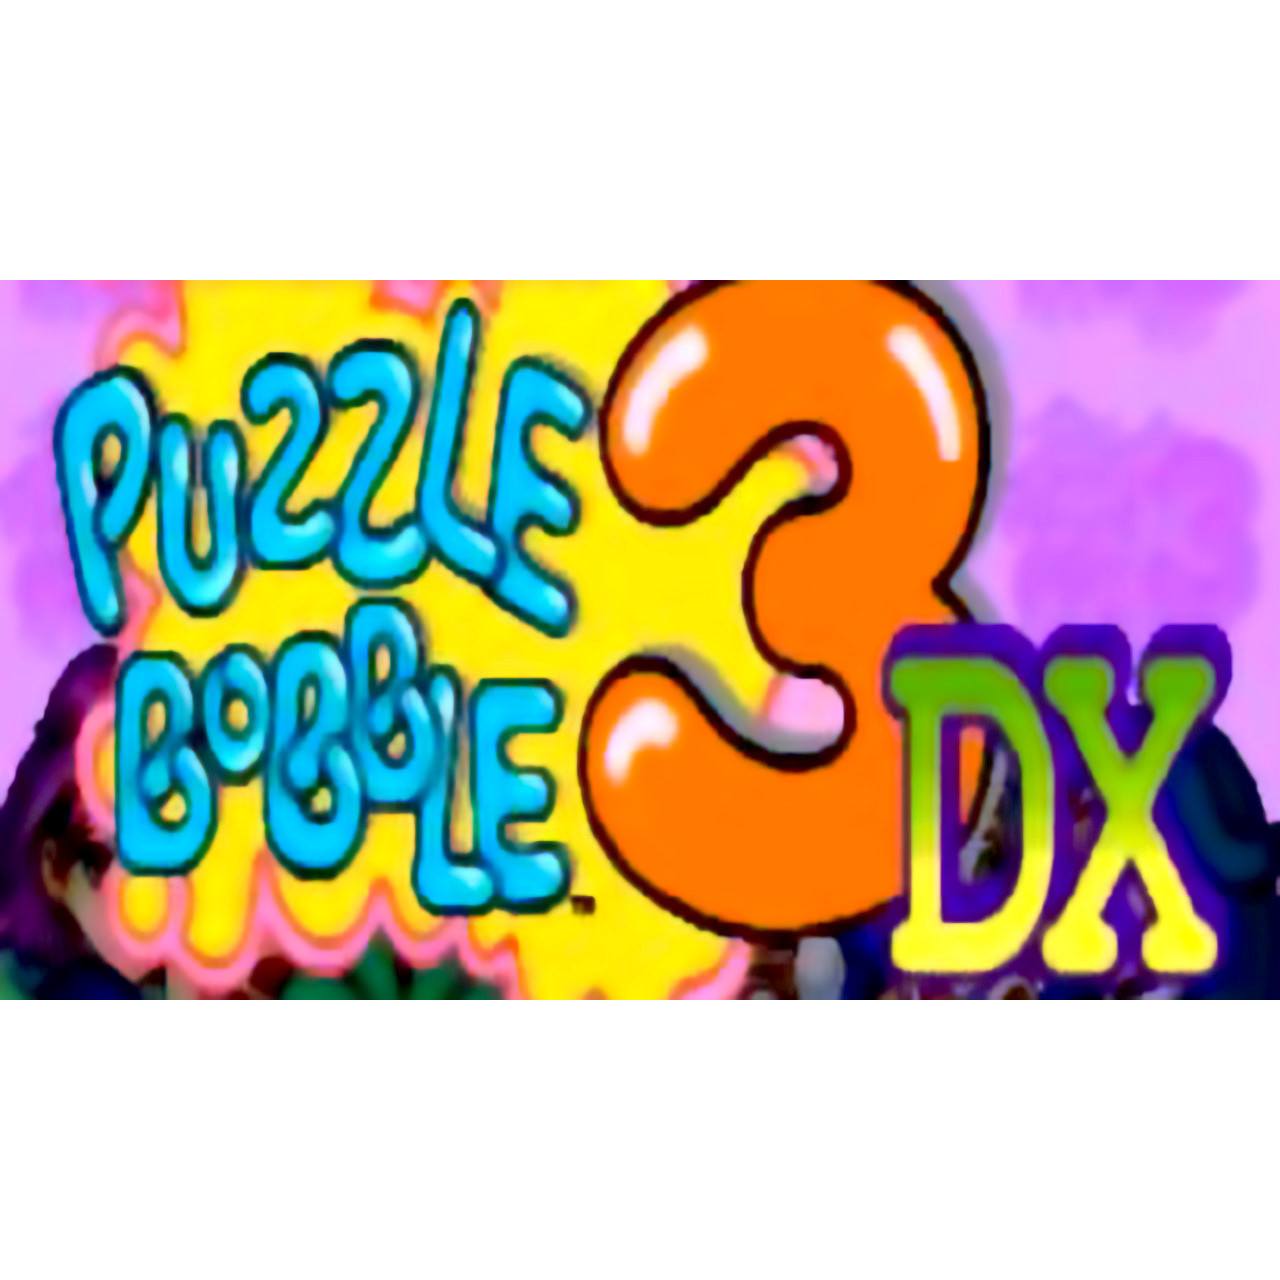 Puzzle Bobble 3 DX Japan Import Sony PlayStation Game